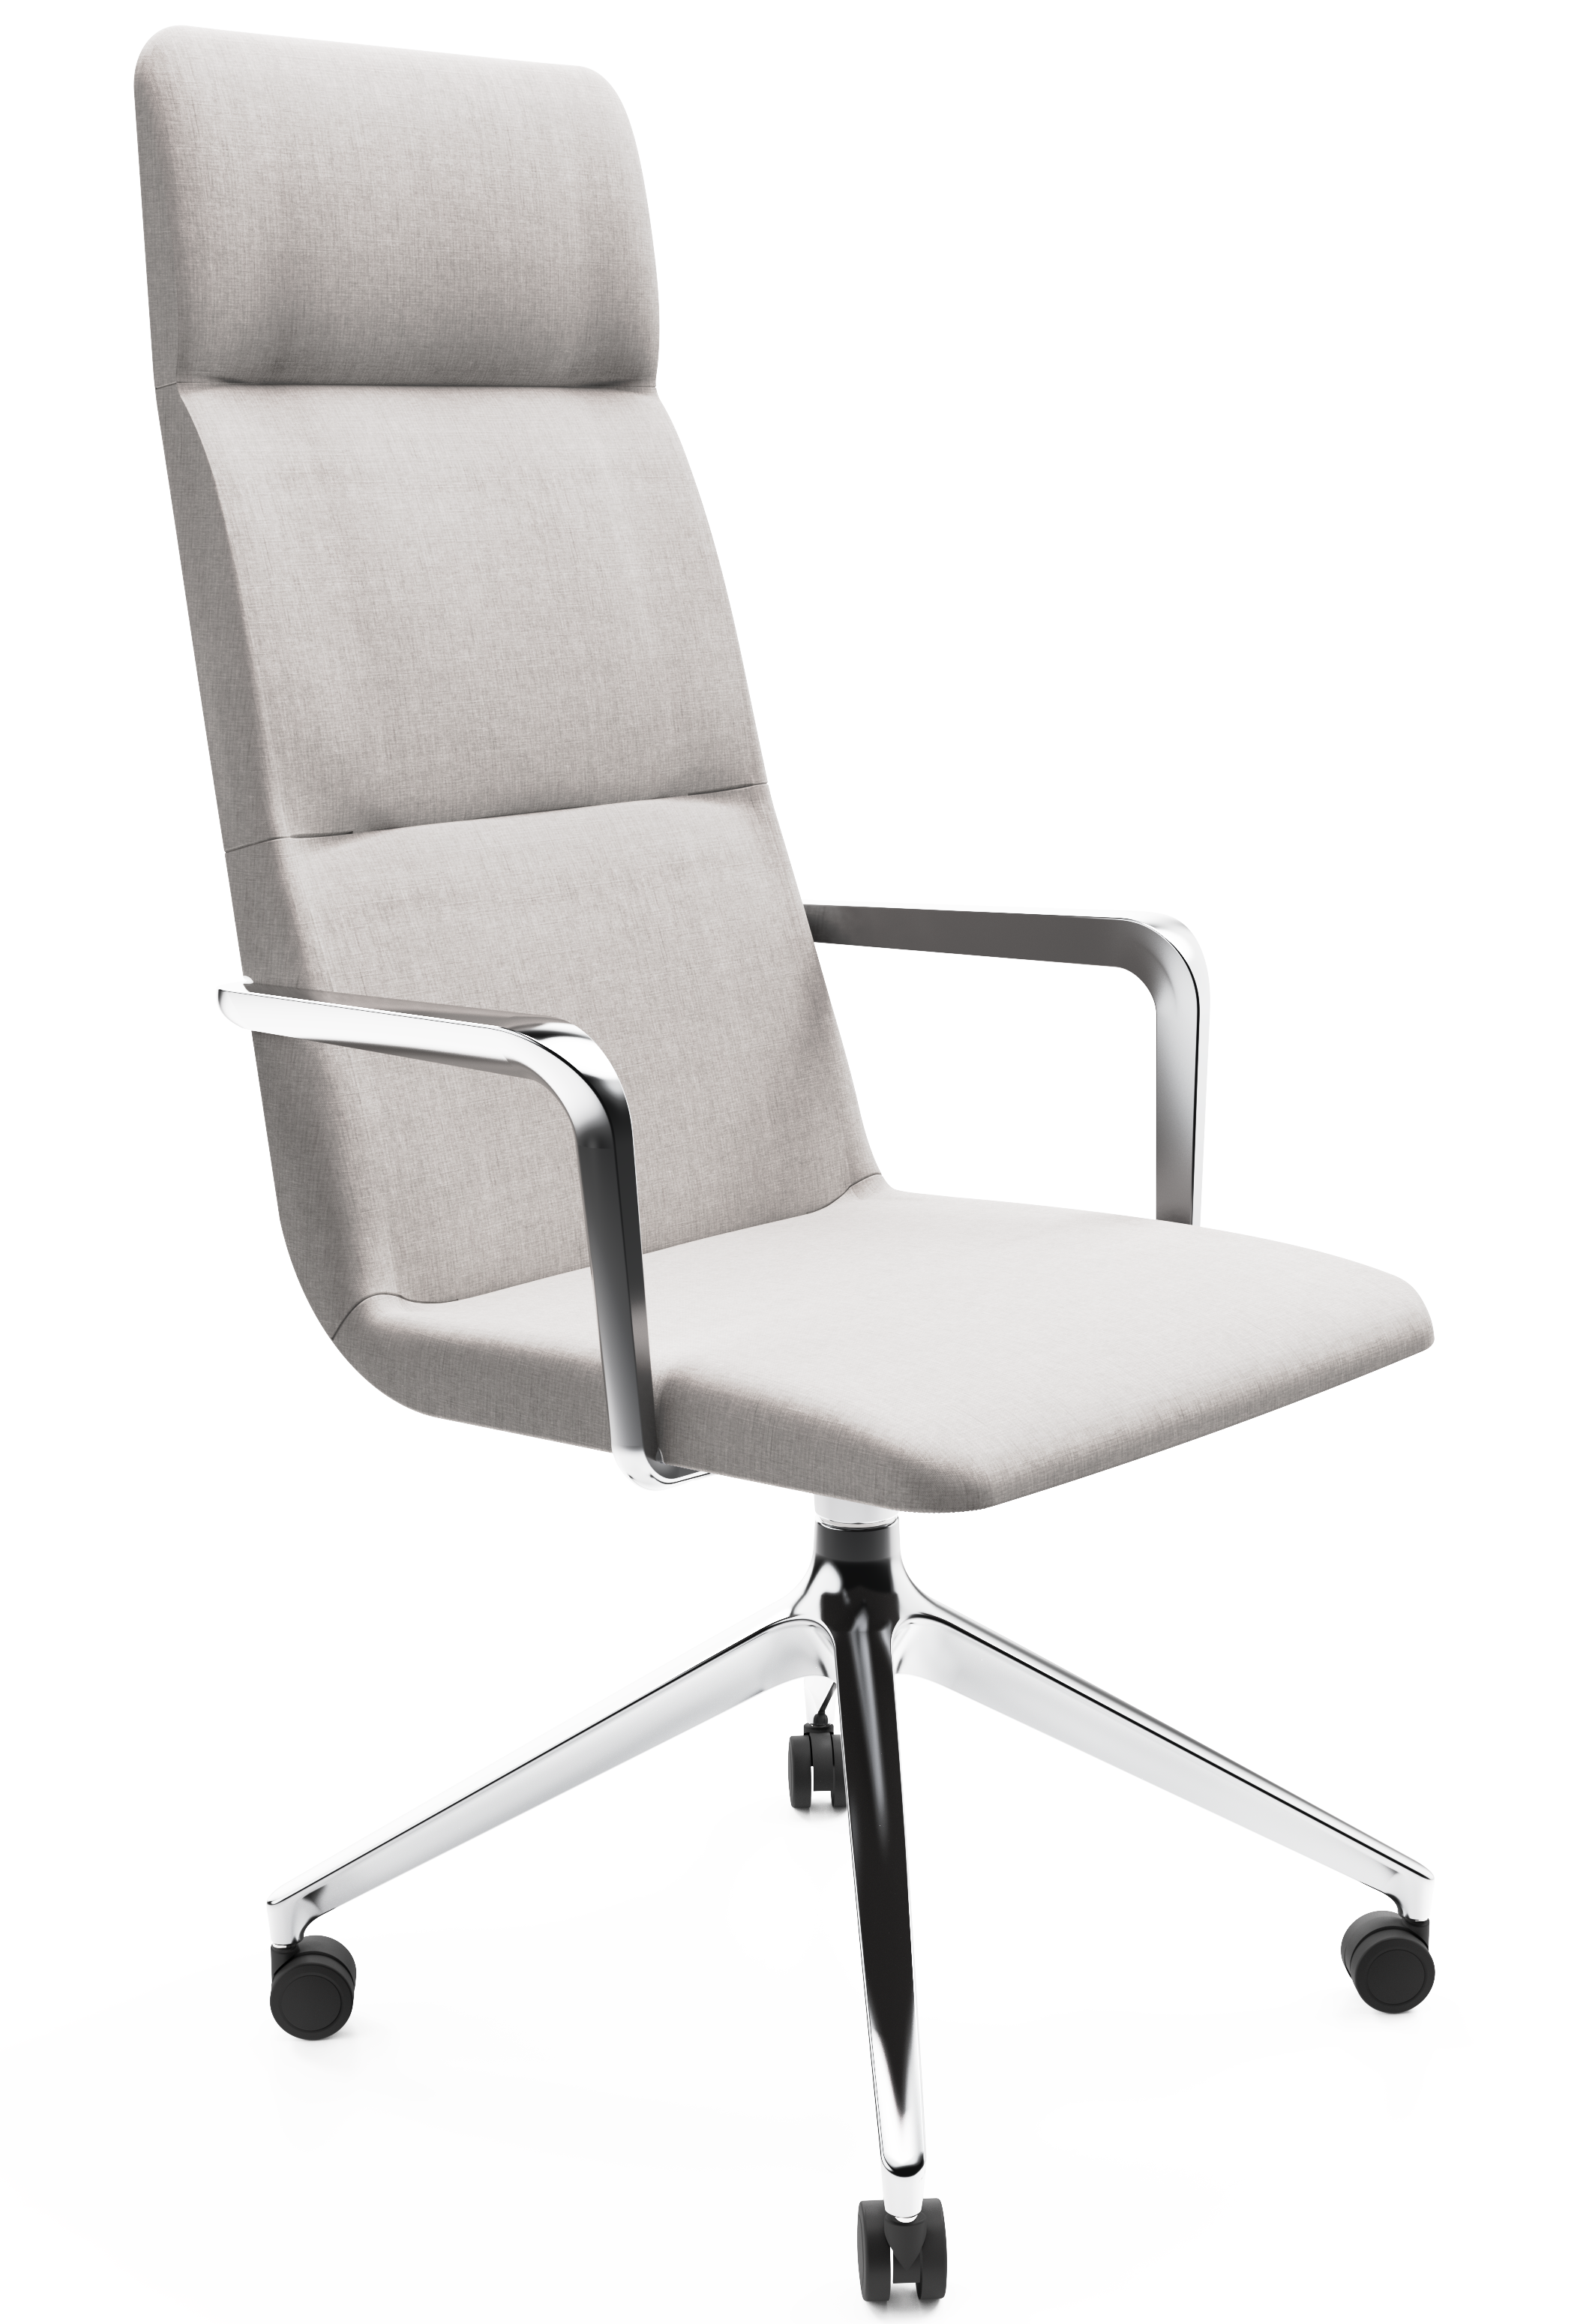 WS - Accord High 4 star base with castors chair - chrome - remix 126 - front angle